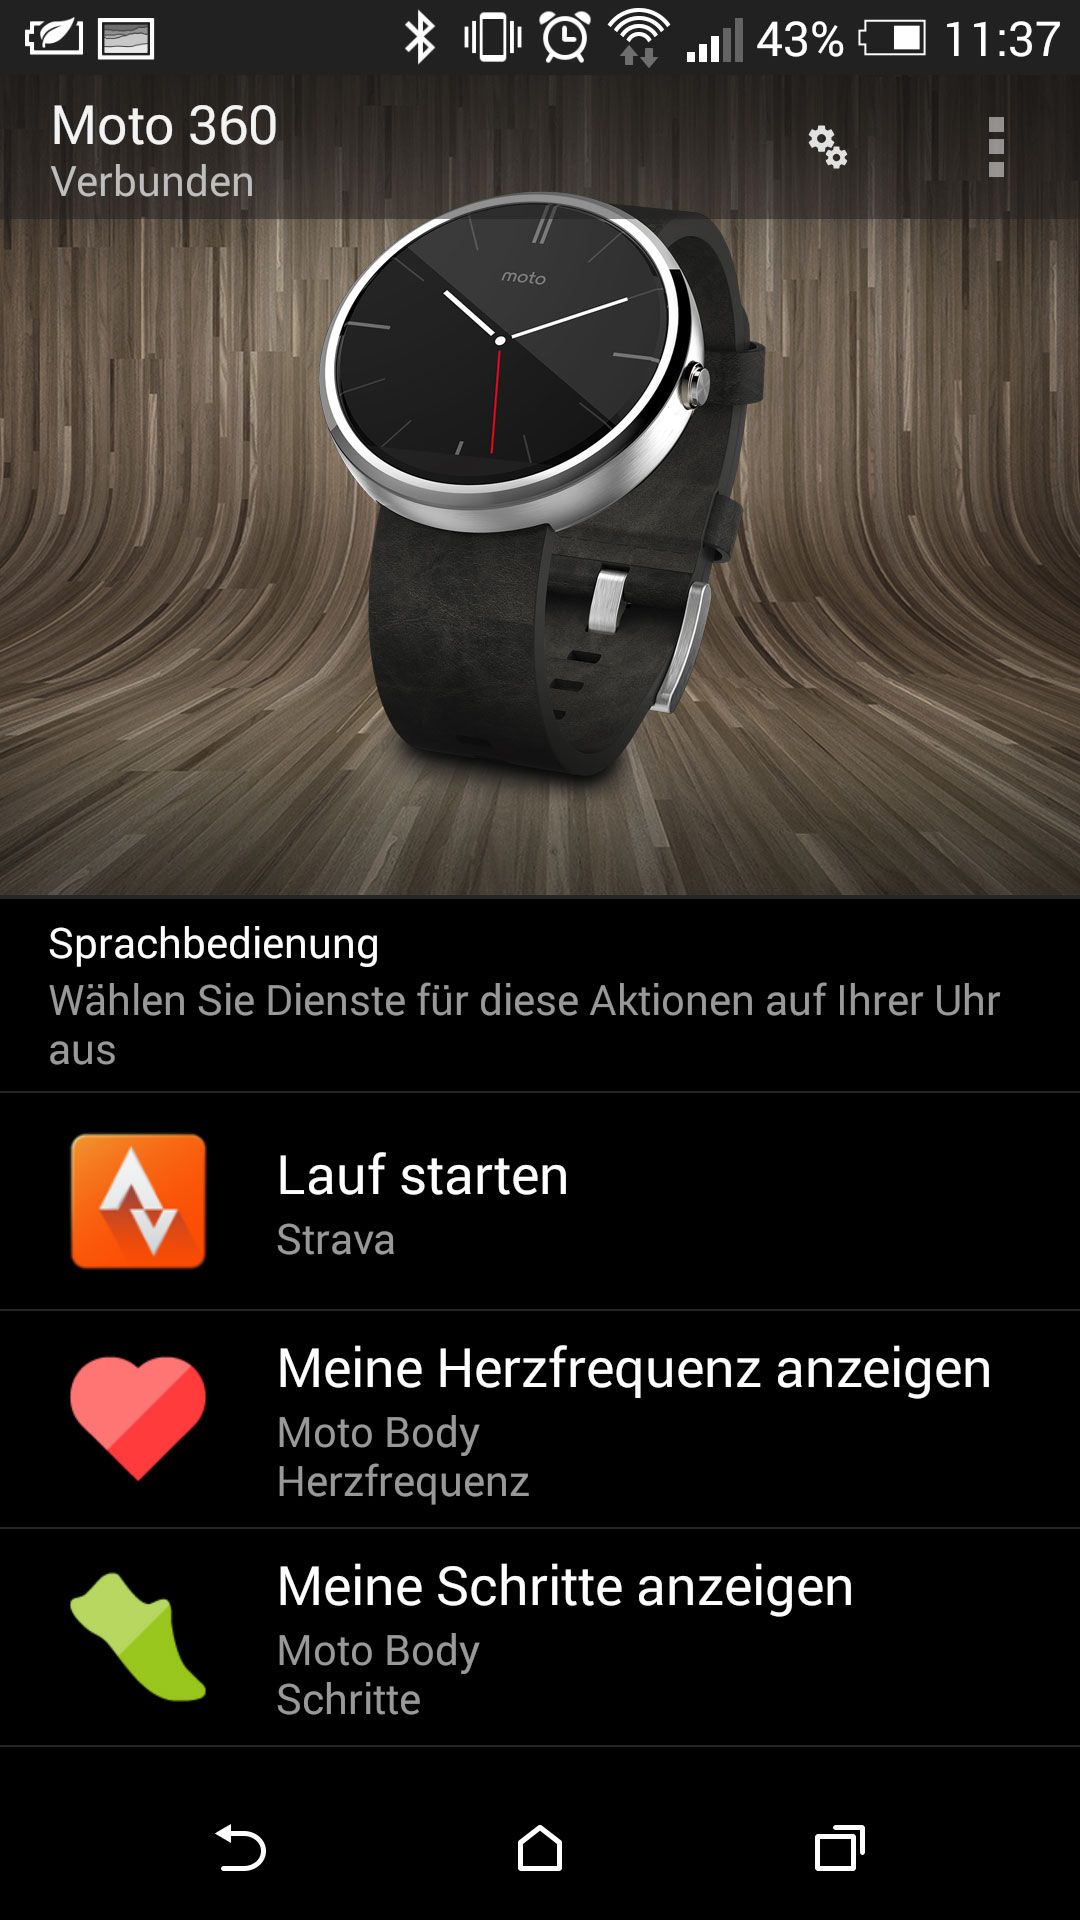 Moto 360 - Android Wear App